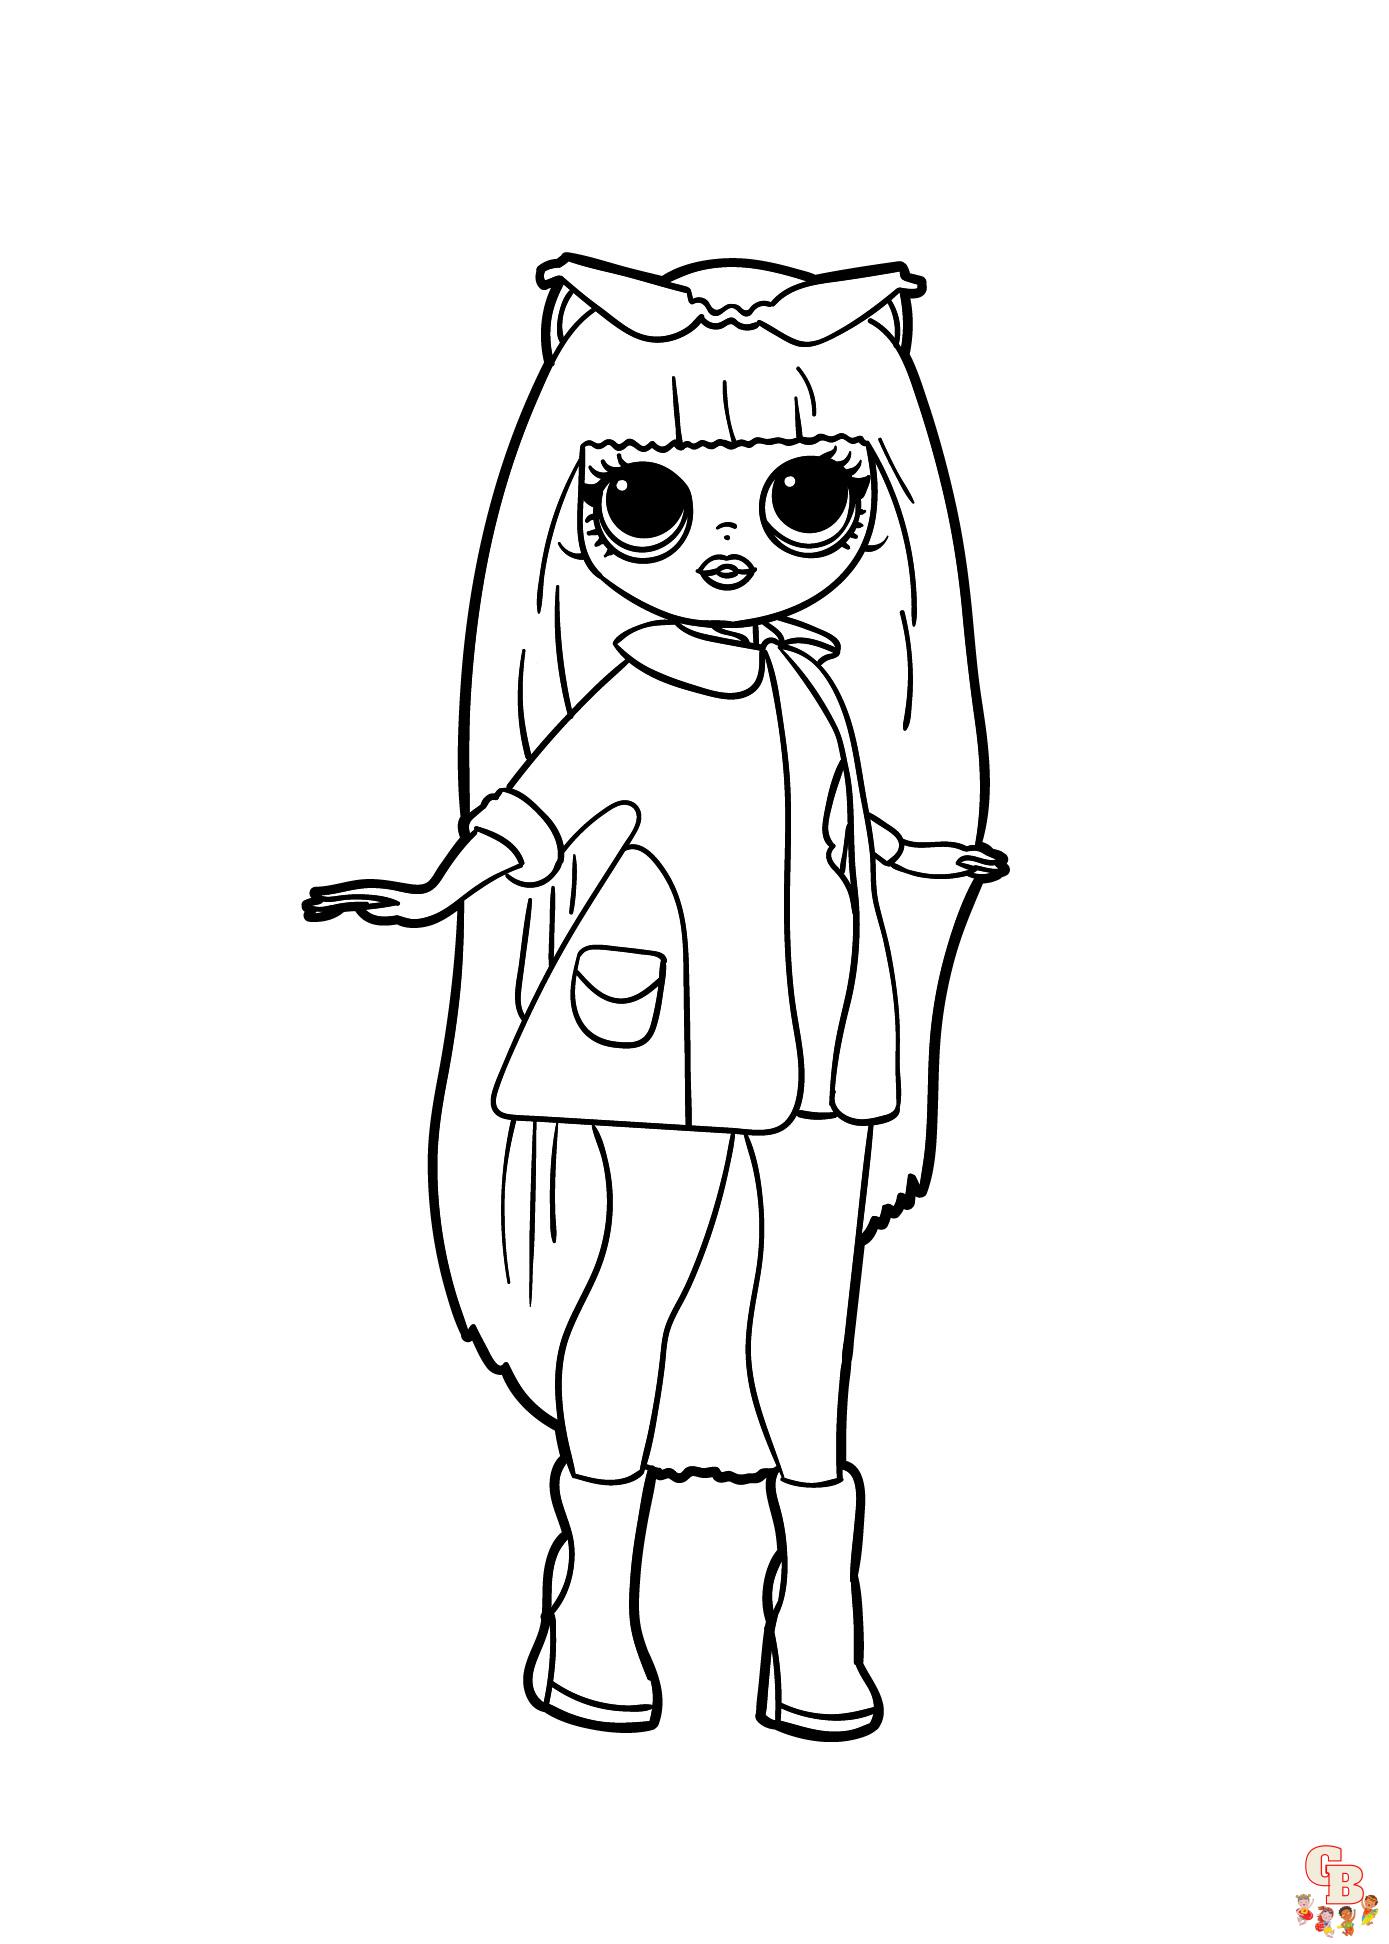 omg fashion lol omg doll coloring pages 4